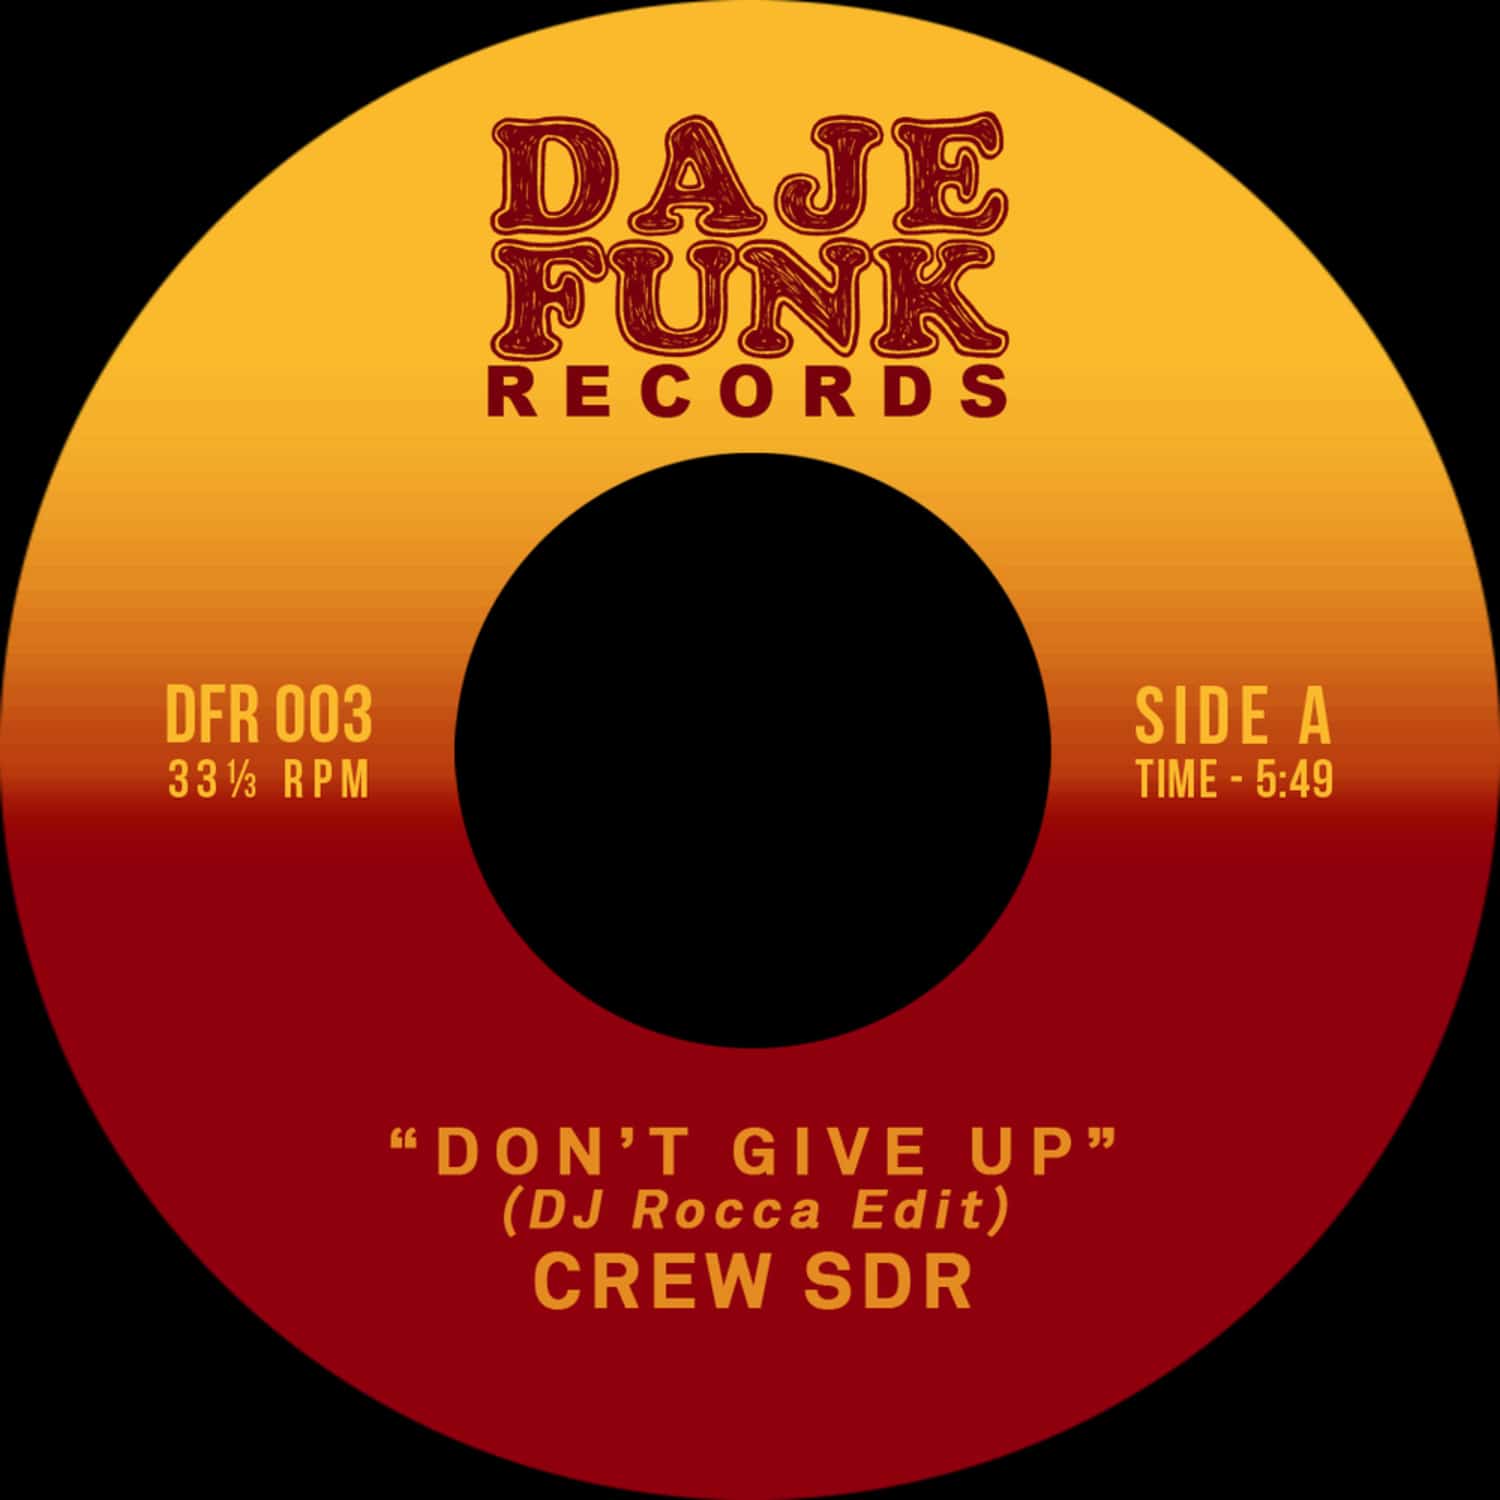 Crew SDR / Fat B. - DONT GIVE UP / KEEP IT COMING 